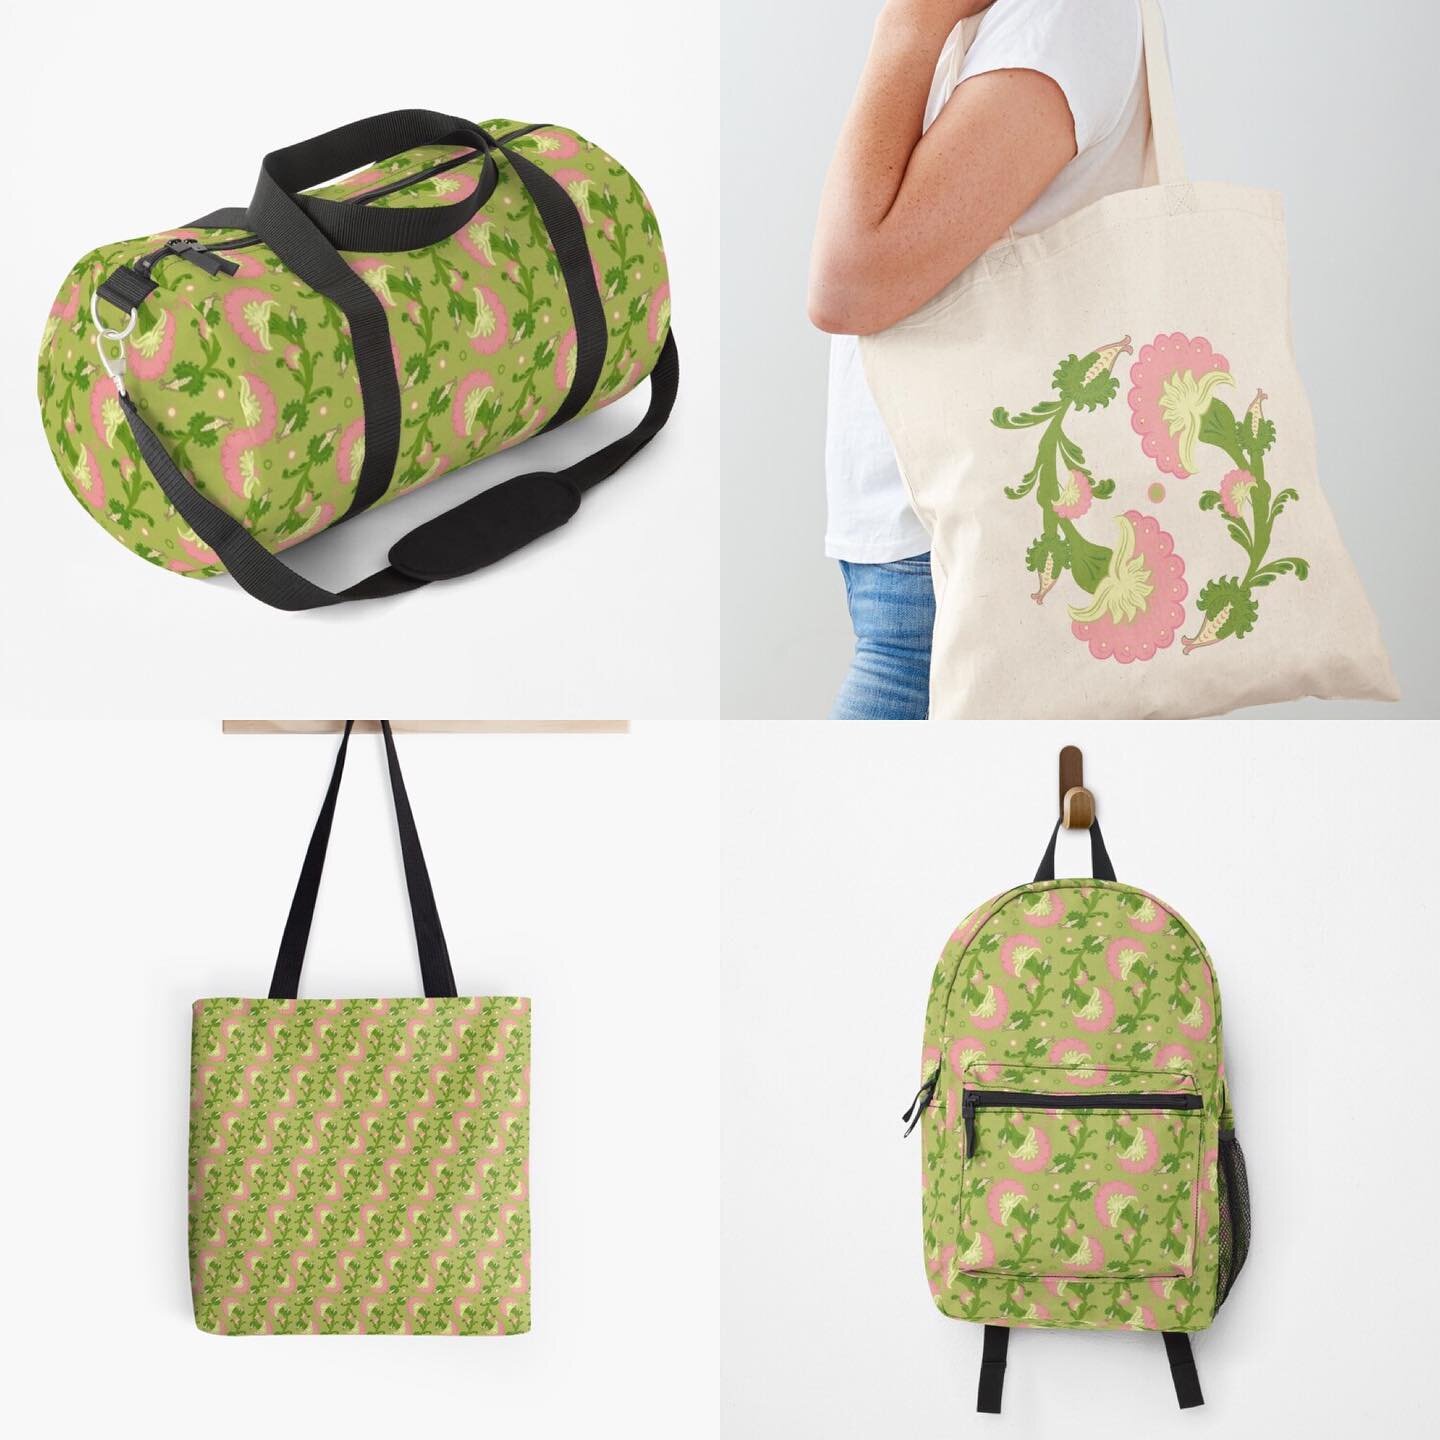 A fun, circular flower pattern design in pink, green, and yellow featured on a variety of bags, such a duffle bag, backpack, cotton tote bag, and tote bag. Available in my Redbubble shop. Link in my bio. #redbubble #redbubbleartist #redbubbleshop #to